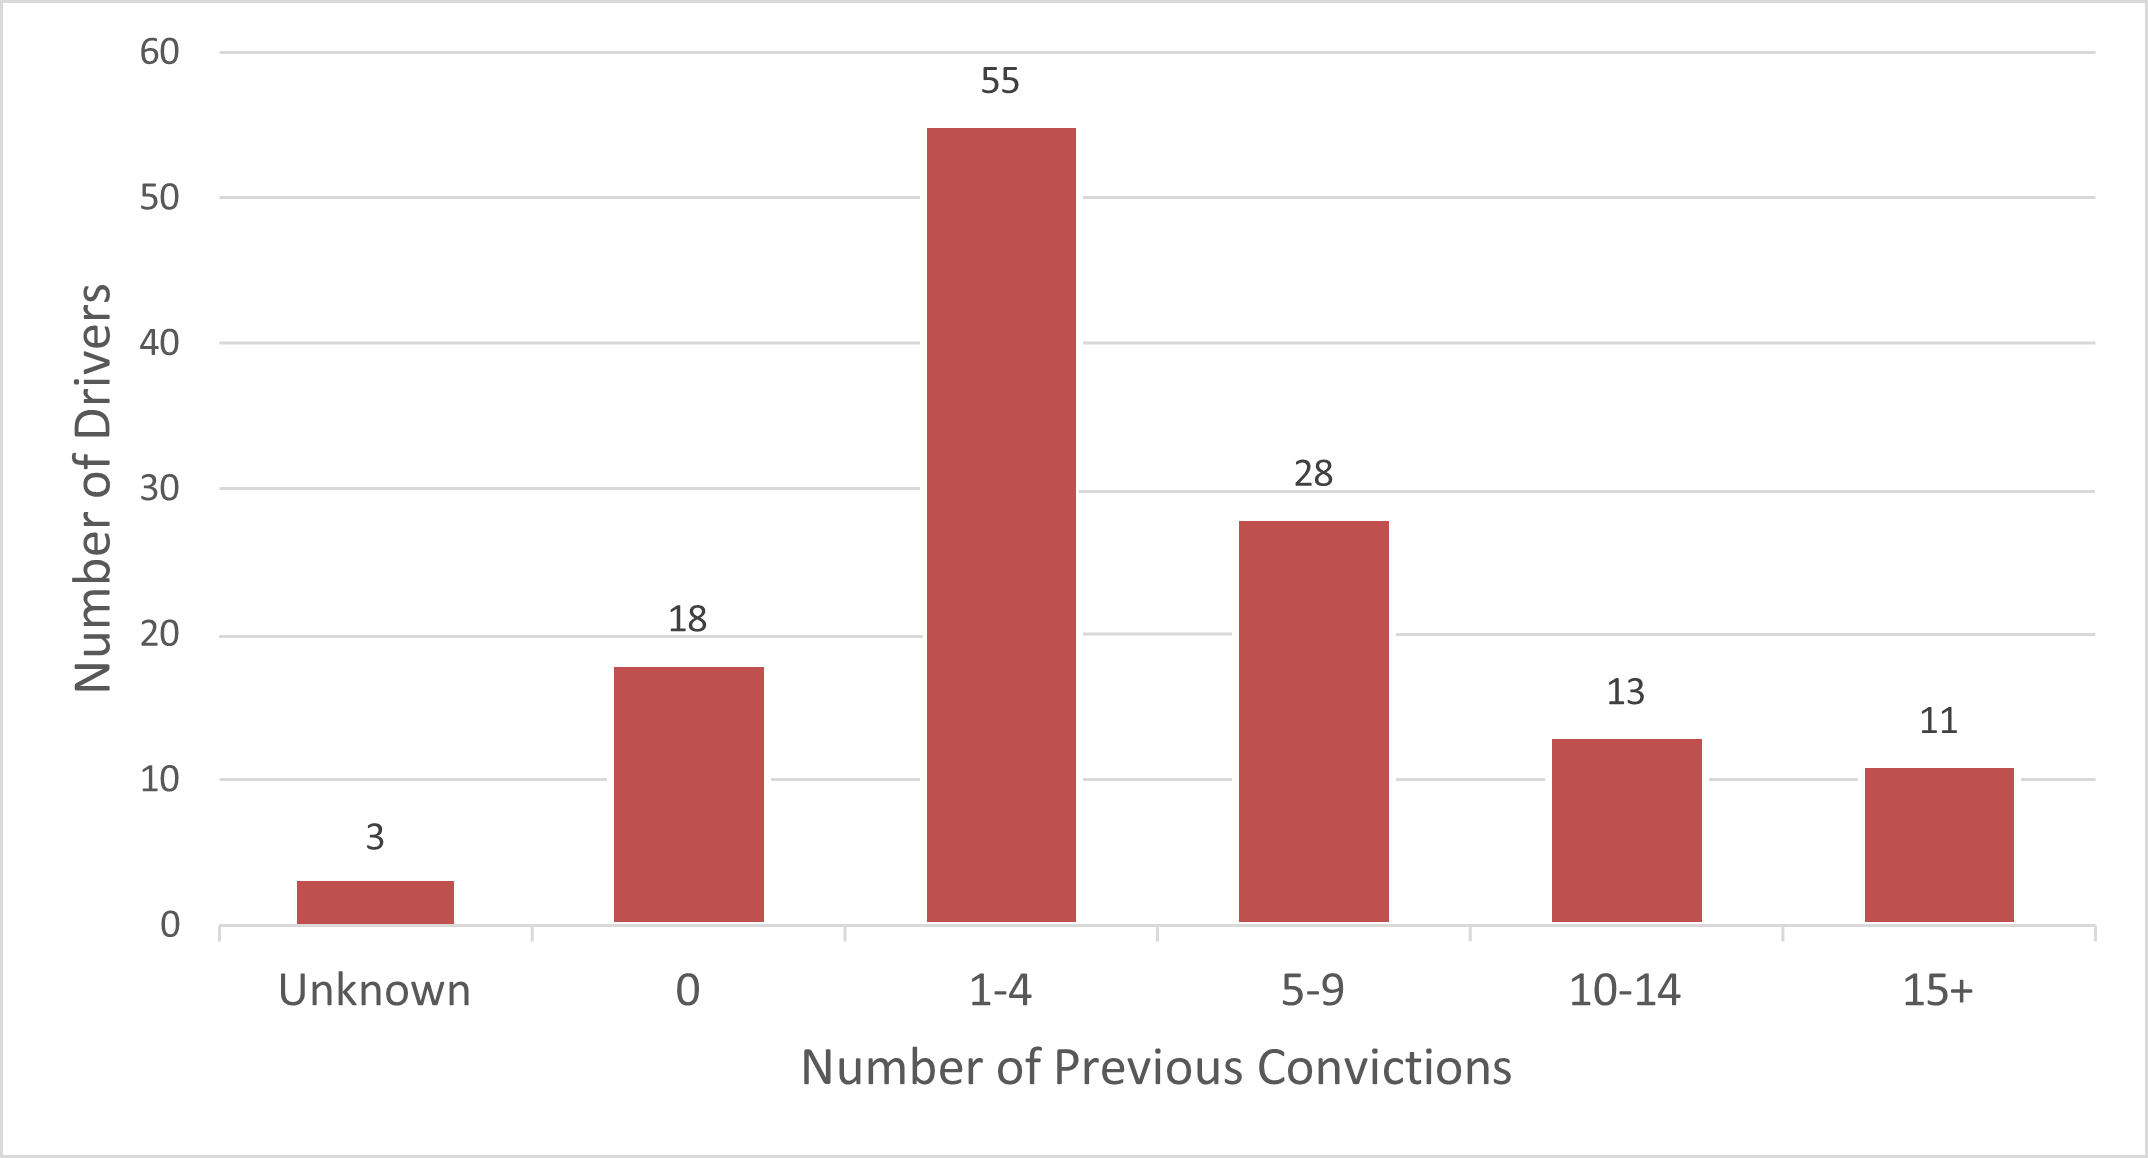 Figure 19 demonstrates the number of previous convictions for traffic-related offences (e.g., speeding, distraction, drinking and driving, fleeing the scene, etc.) among drivers in fatal collisions. 